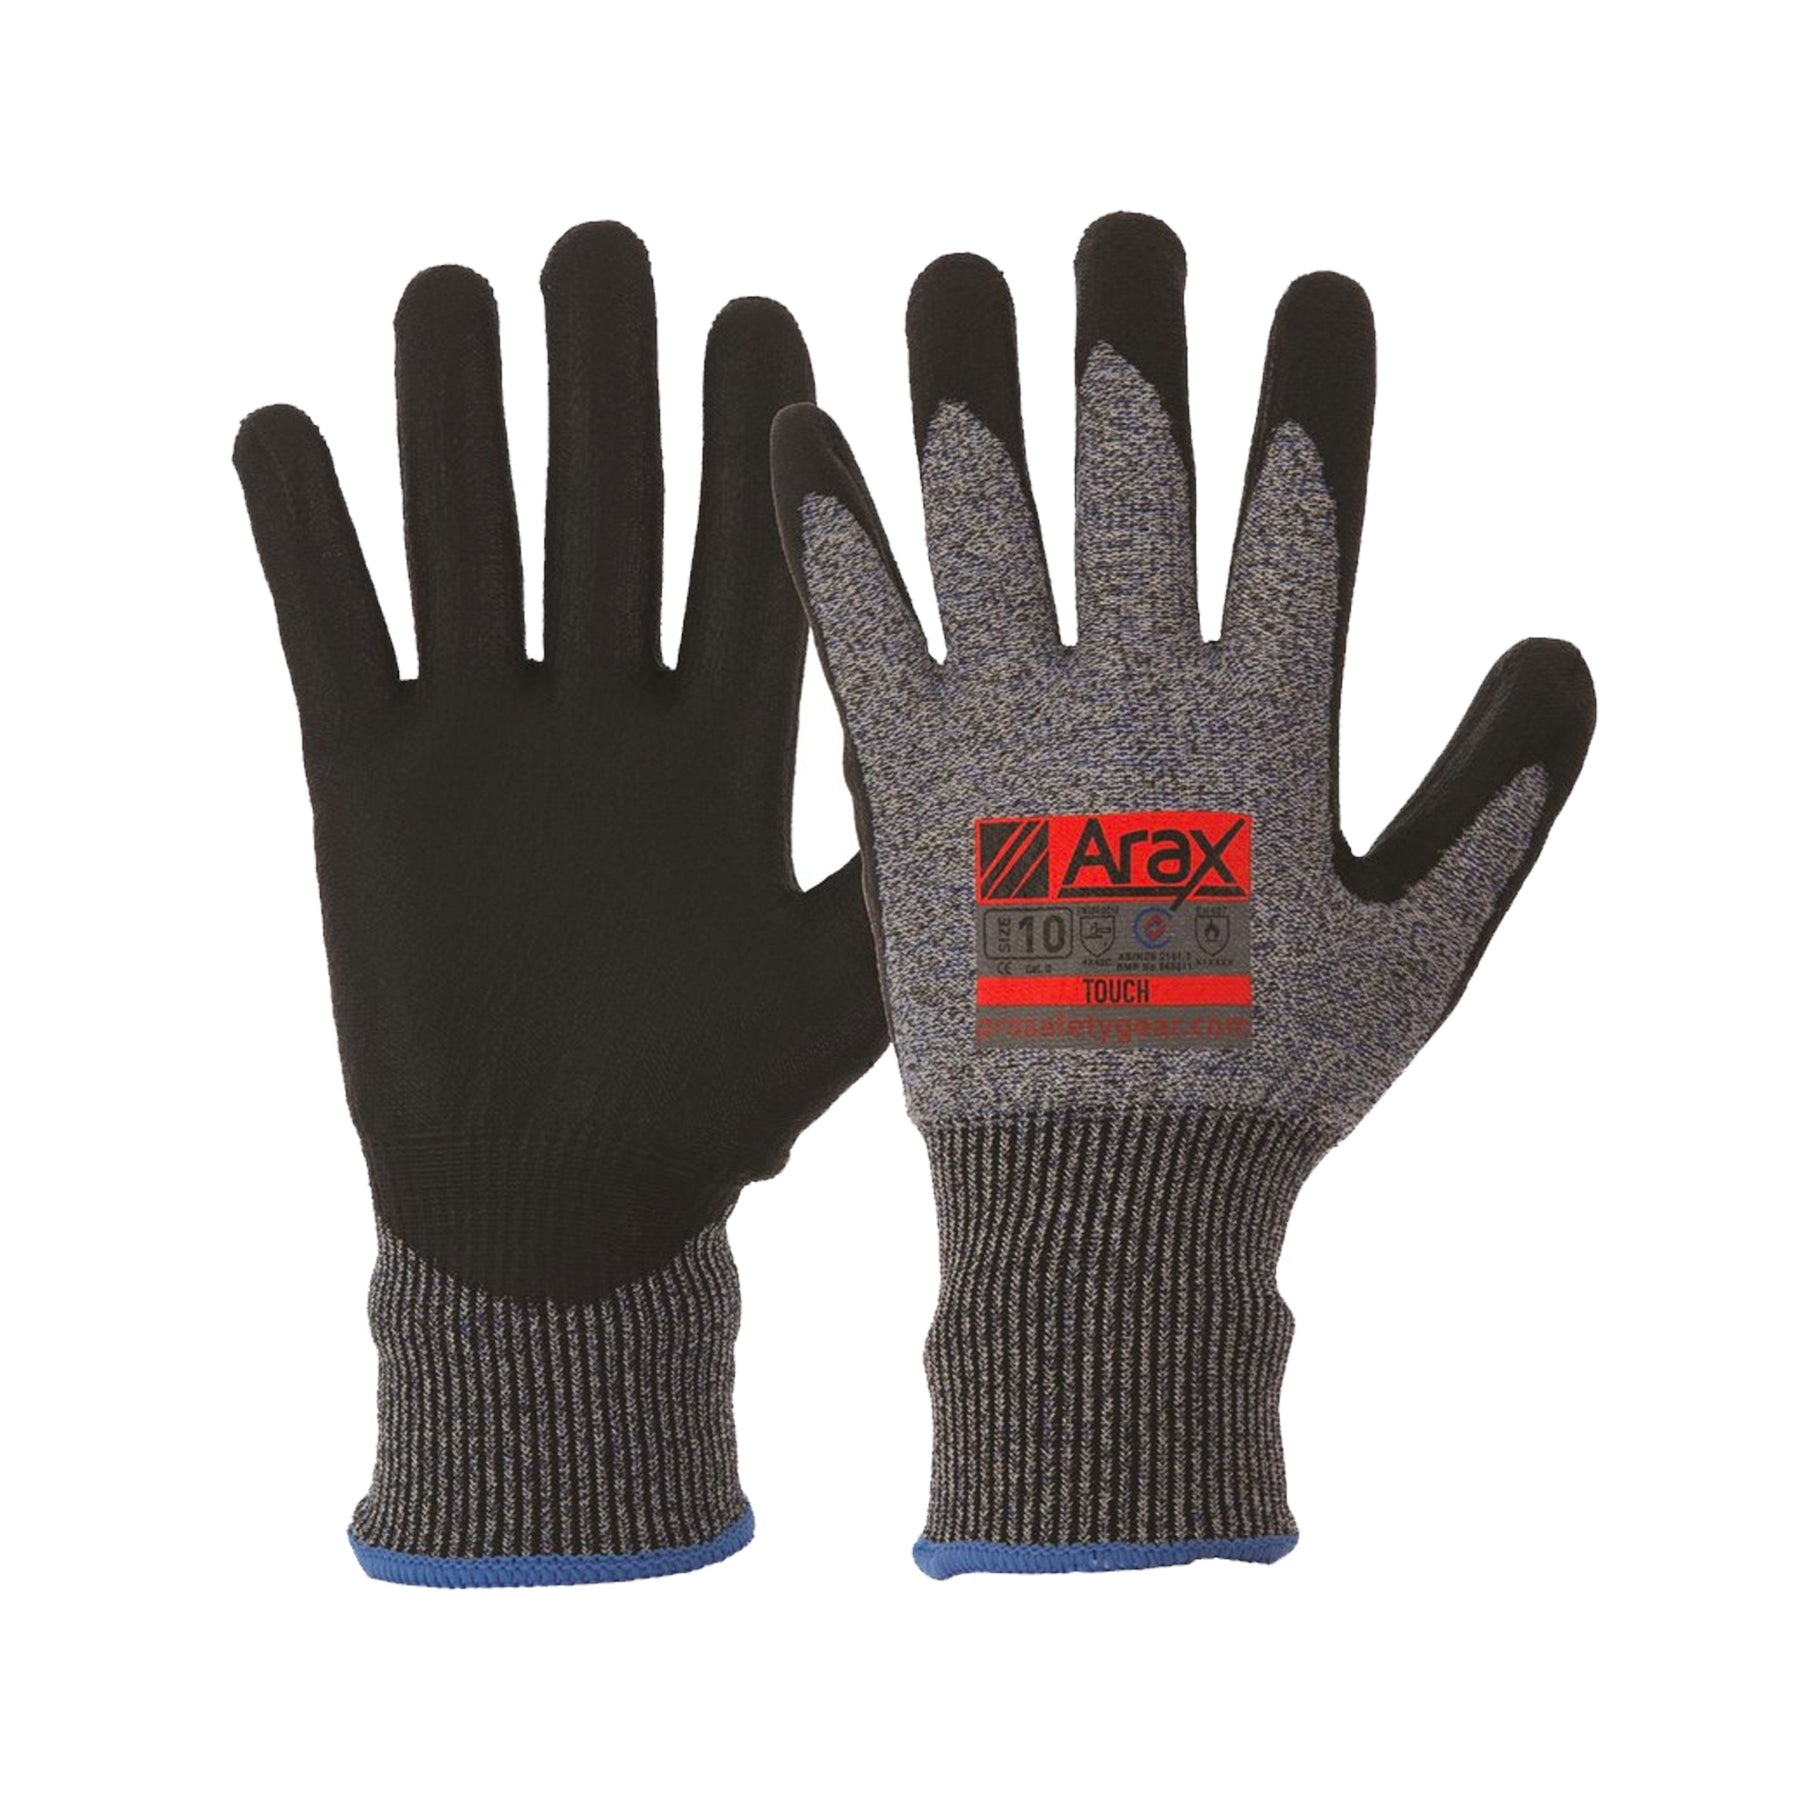 arax touch gloves